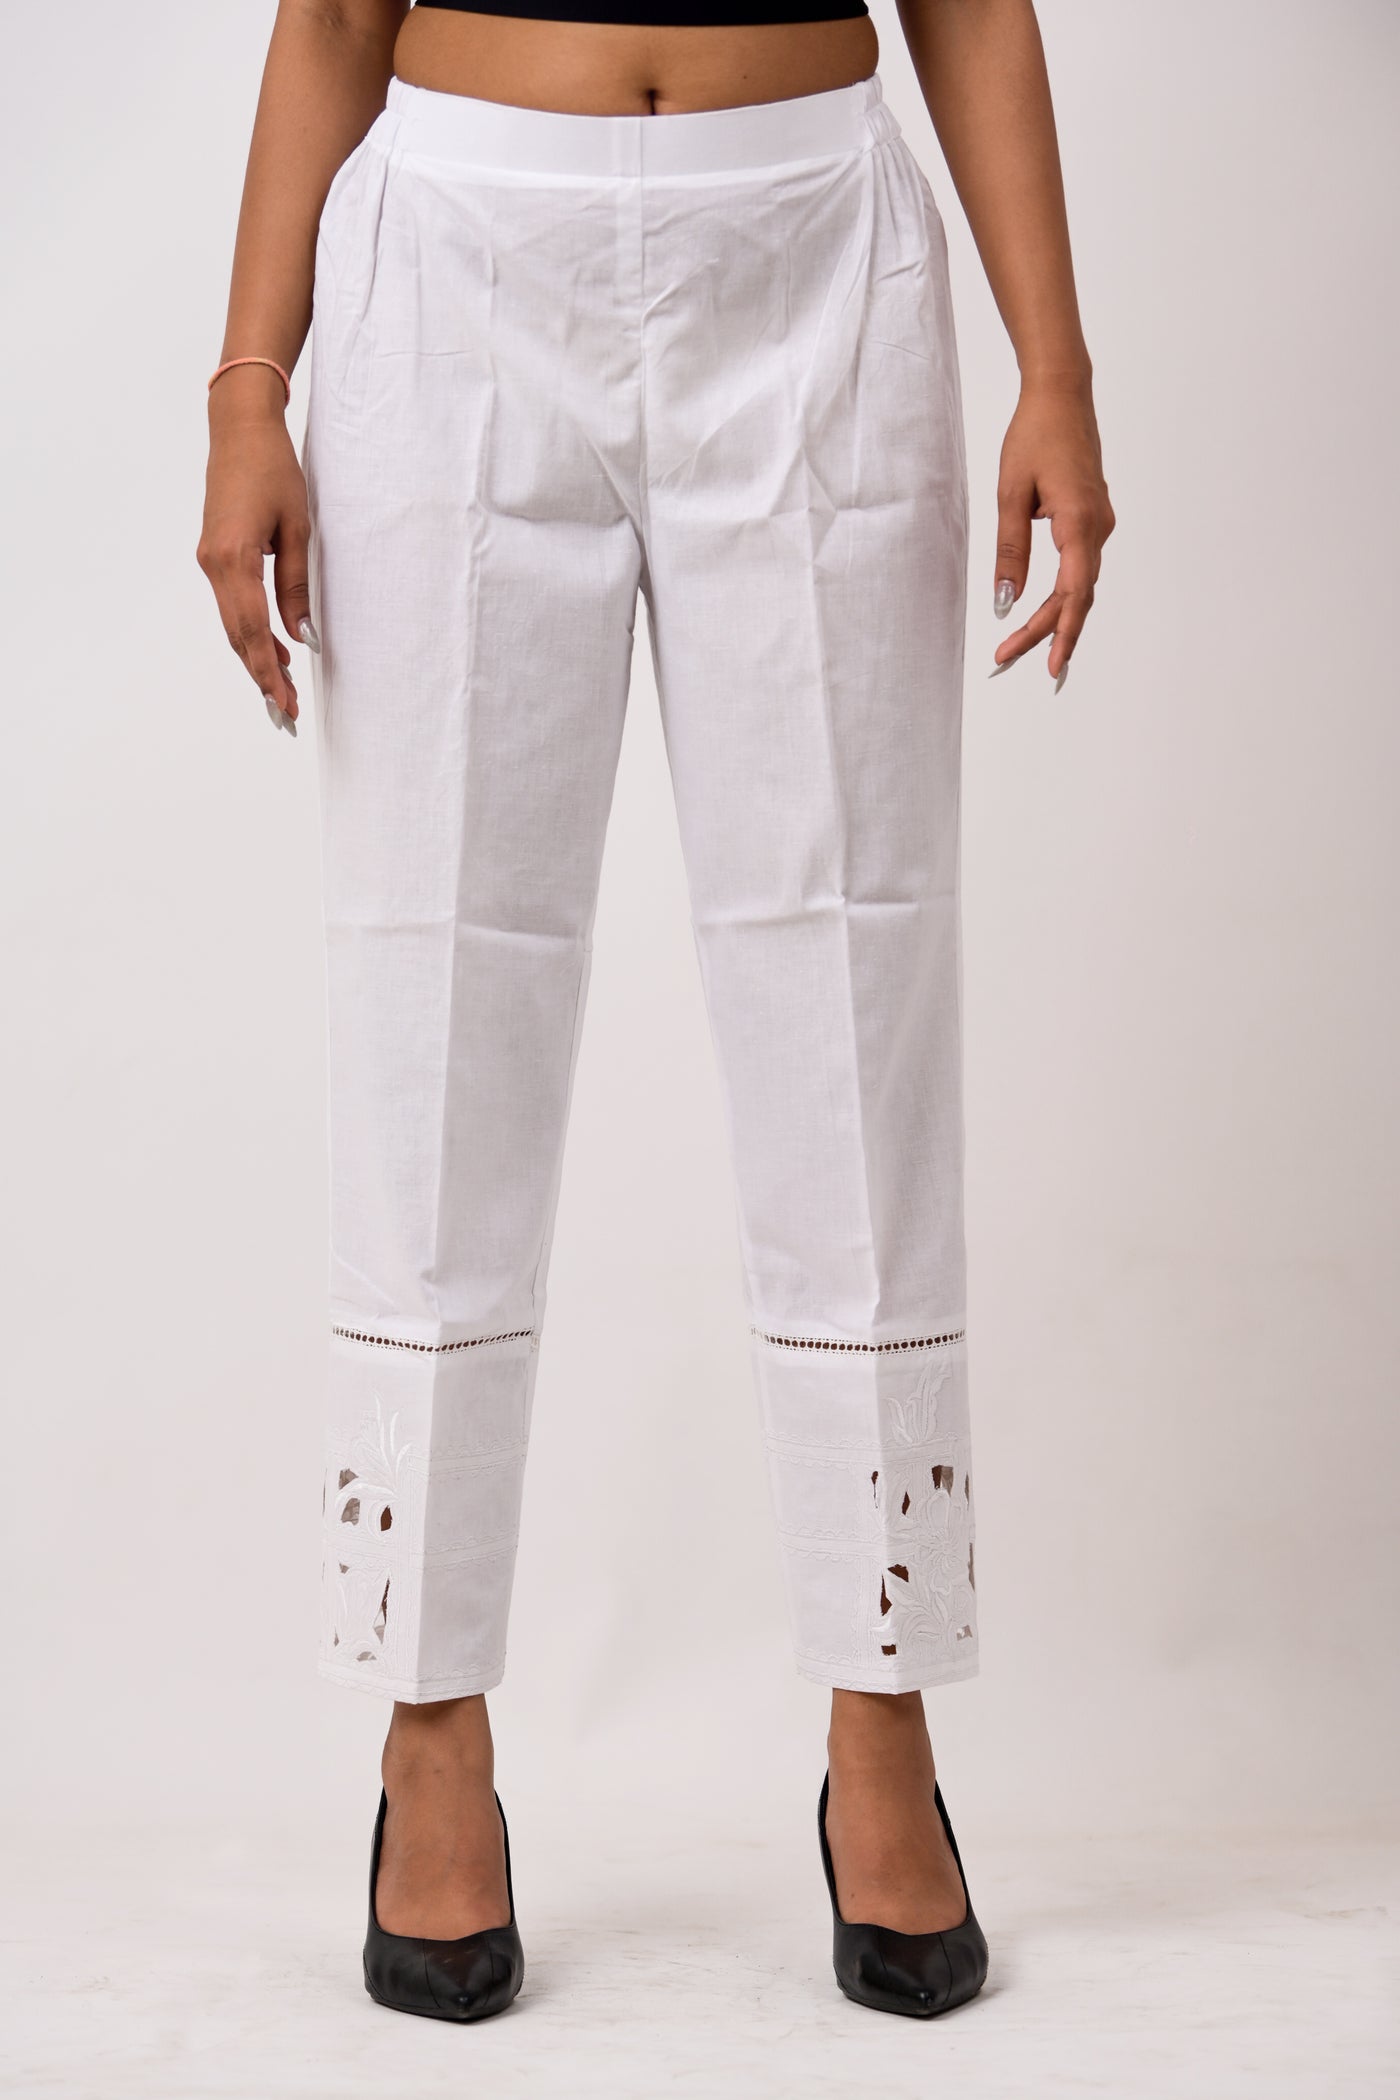 White on white Checkered Embroidered pants